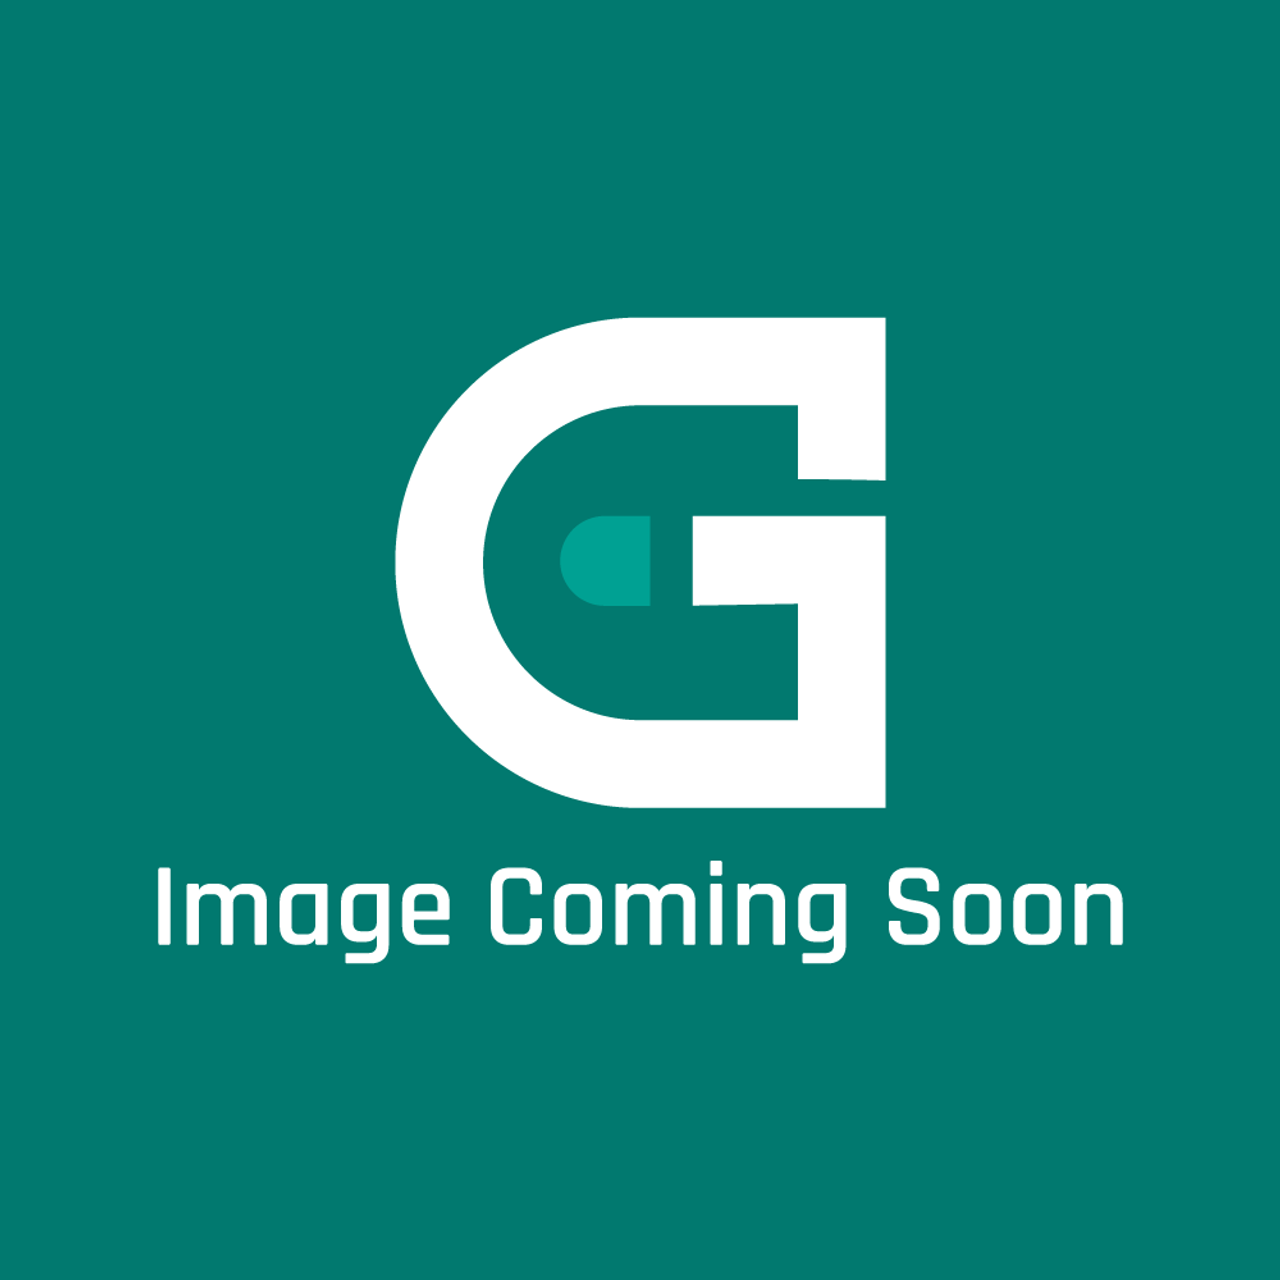 GE Appliances WR71X46058 - Basket - Image Coming Soon!